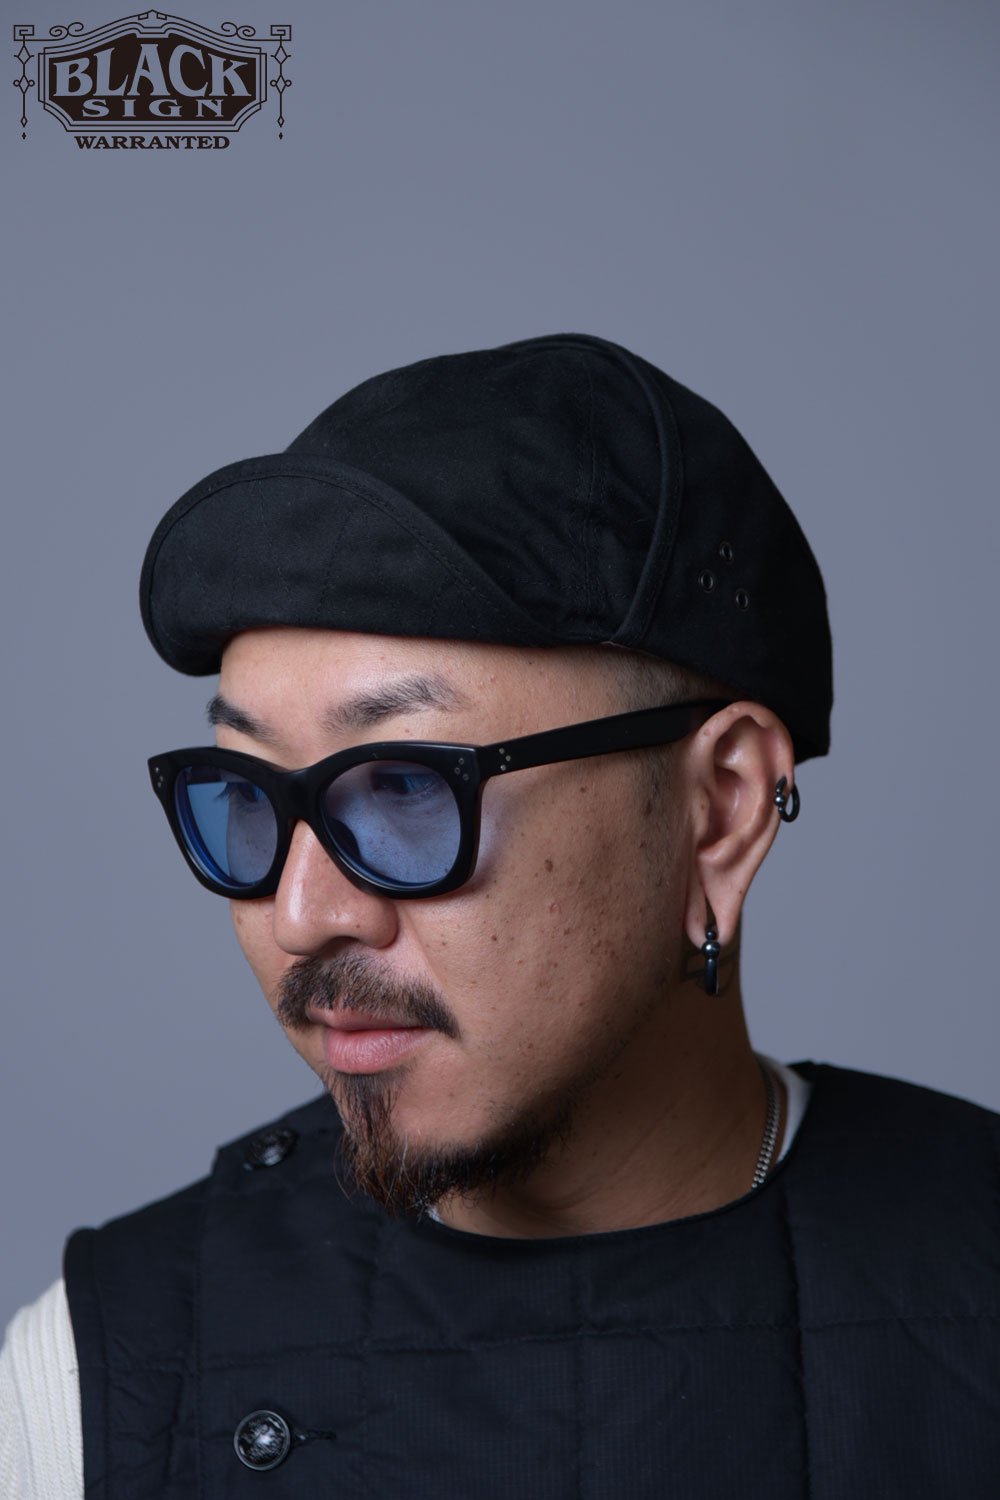 BLACK SIGN(ブラックサイン) キャップ Paraffin Weather Aviator Cap BSFC-22902BEI 通販正規取扱  | ハーレムストア公式通販サイト